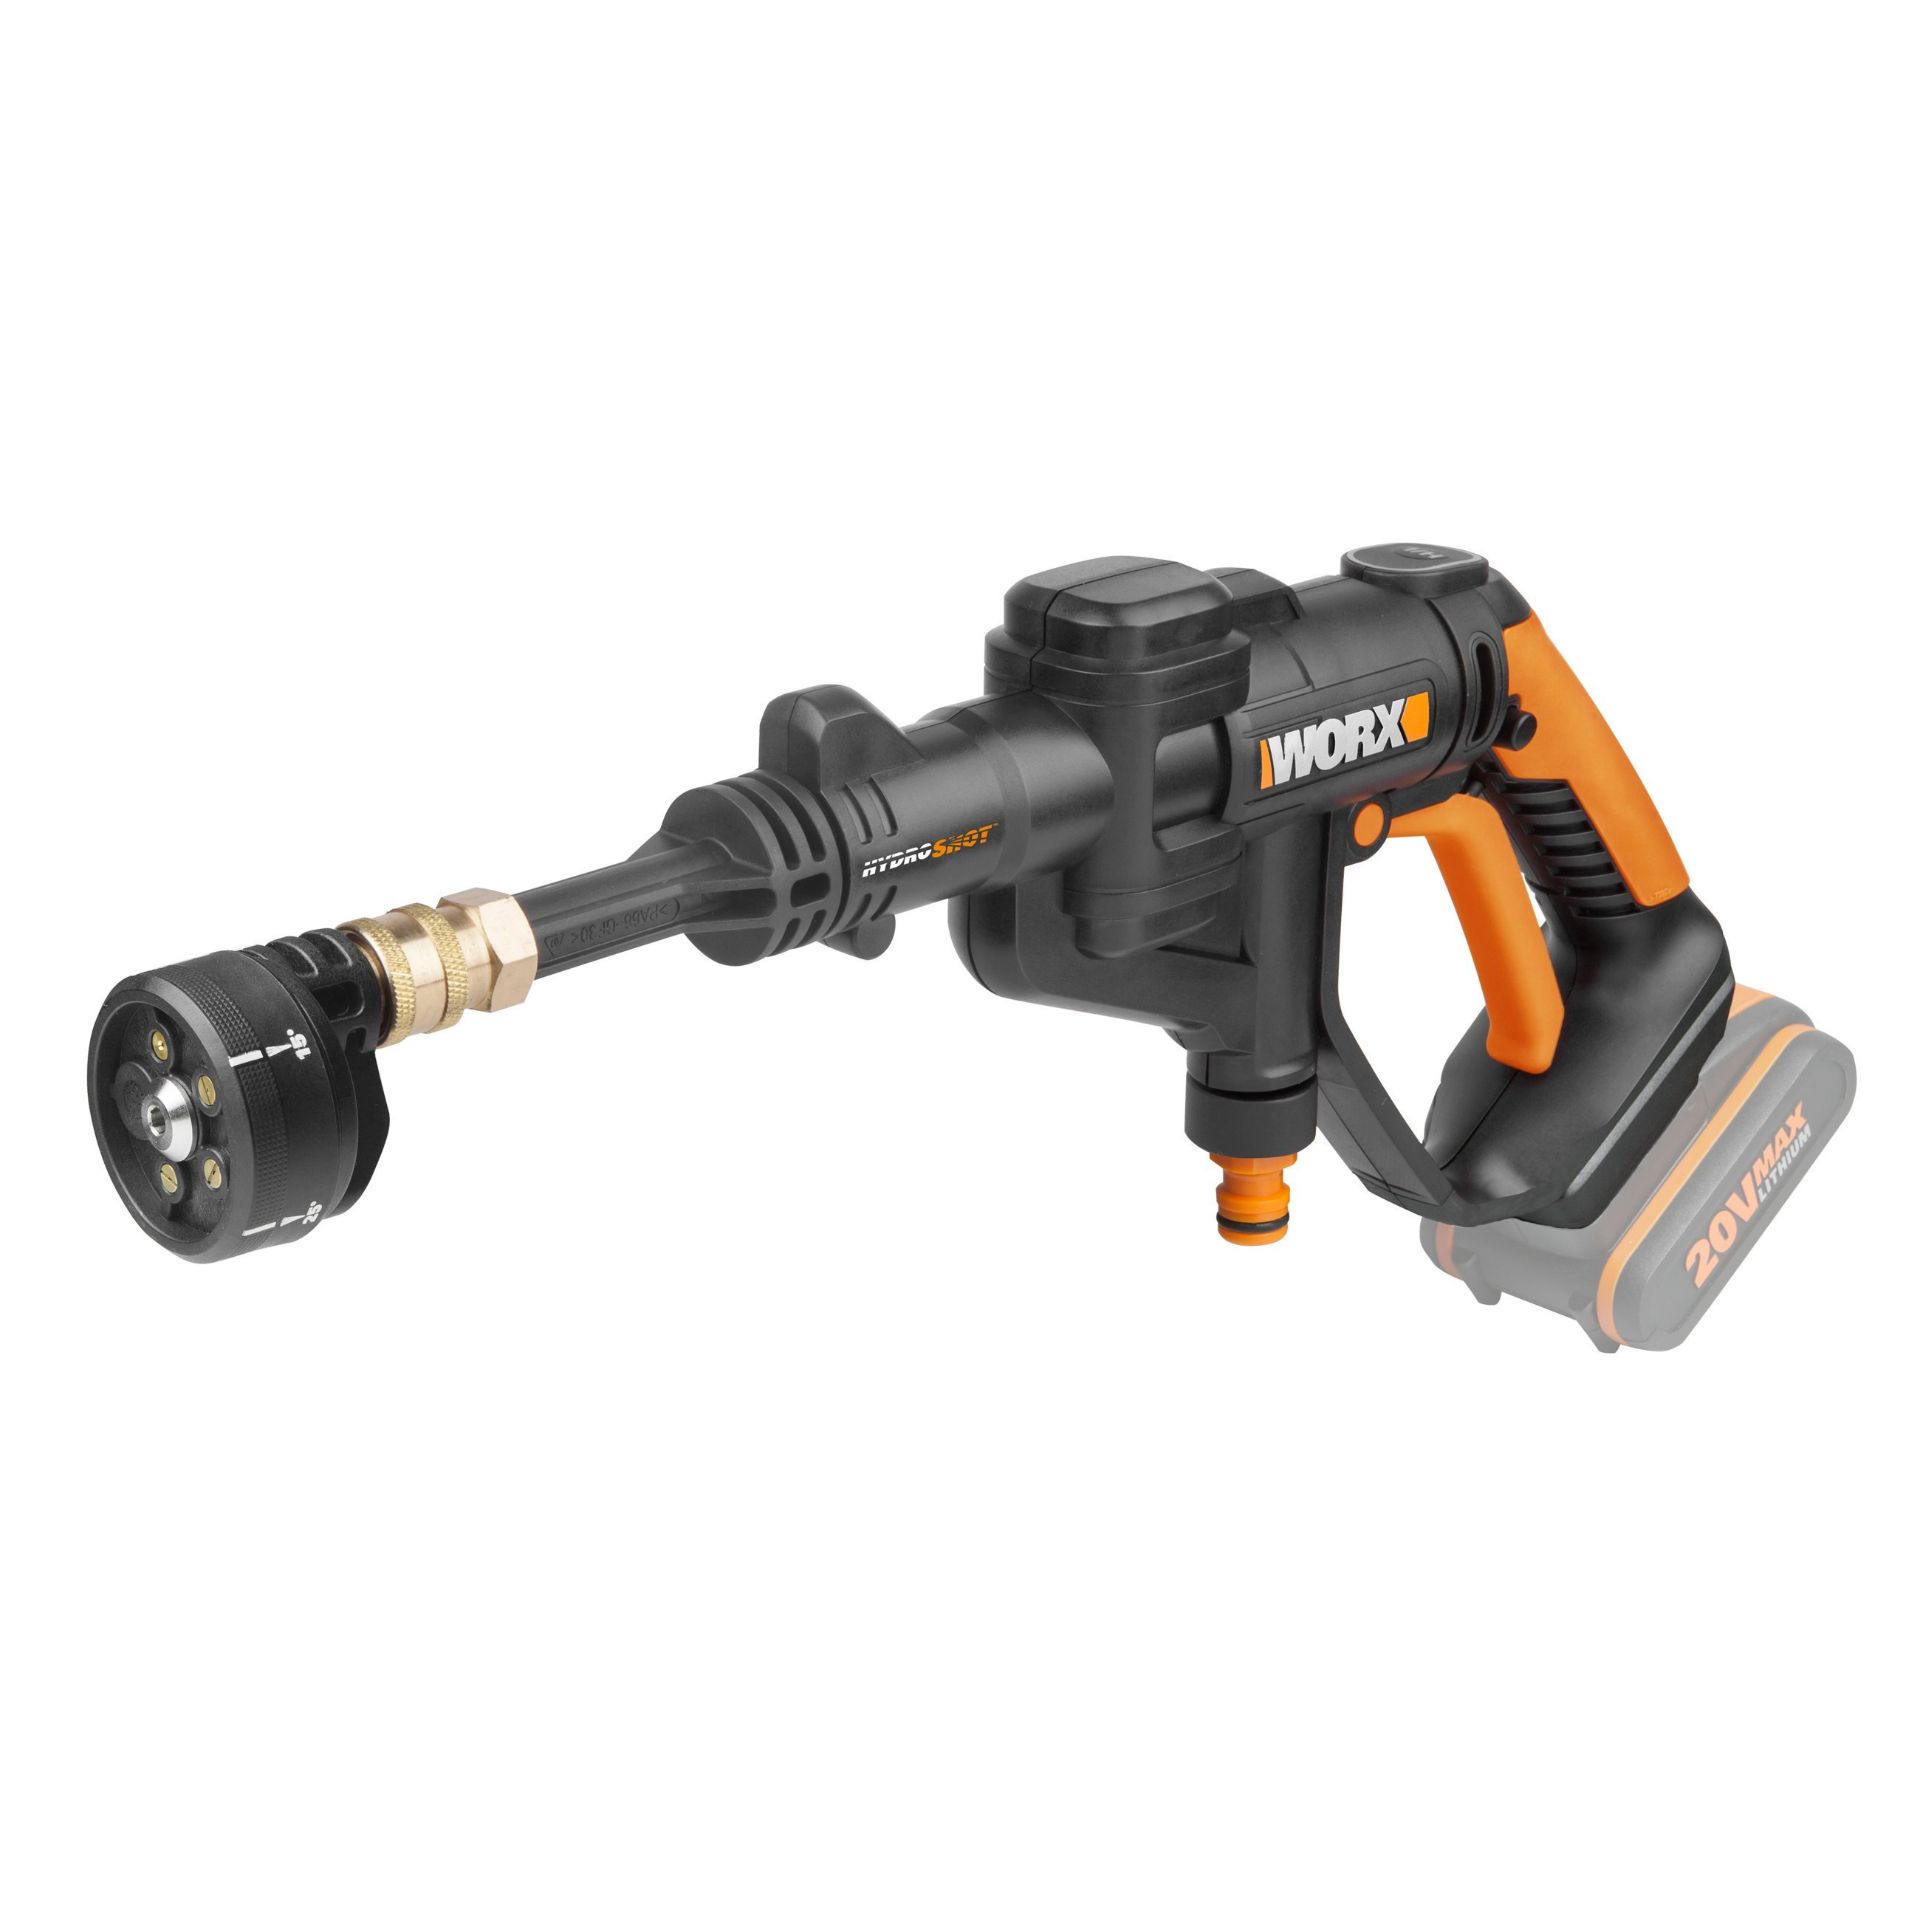 (R15F) 1x Worx Hydro Shot 20V 2 In 1 Portable Power Cleaner / Water Spray RRP £119. Item Appears A